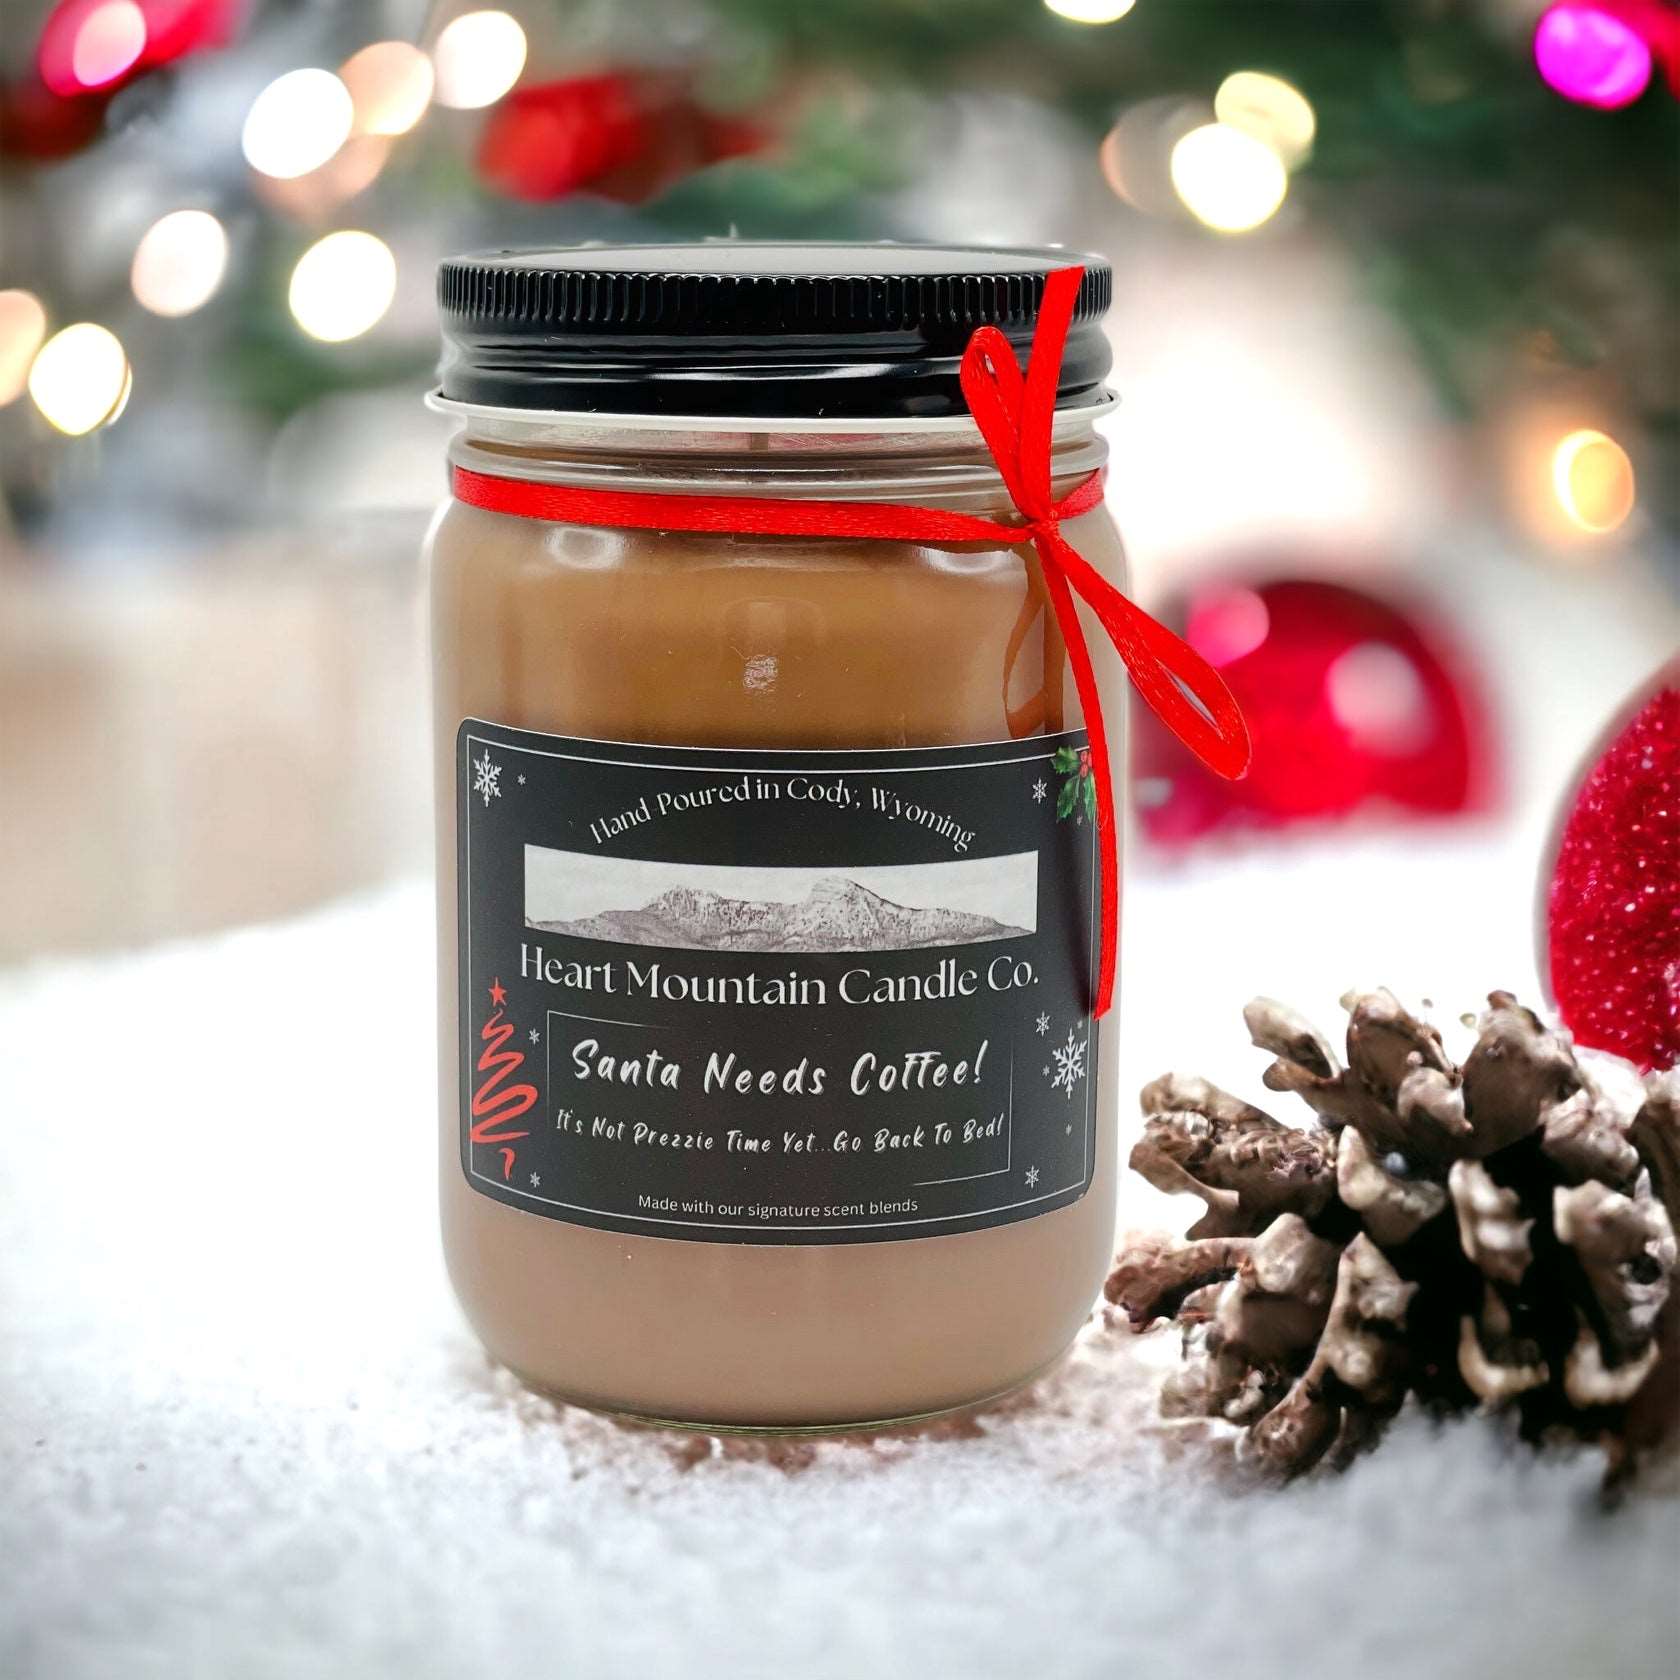 Heart Mountain Candle Co Santa Needs Coffee! It's Not Prezzie Time Yet...Go Back To Bed!